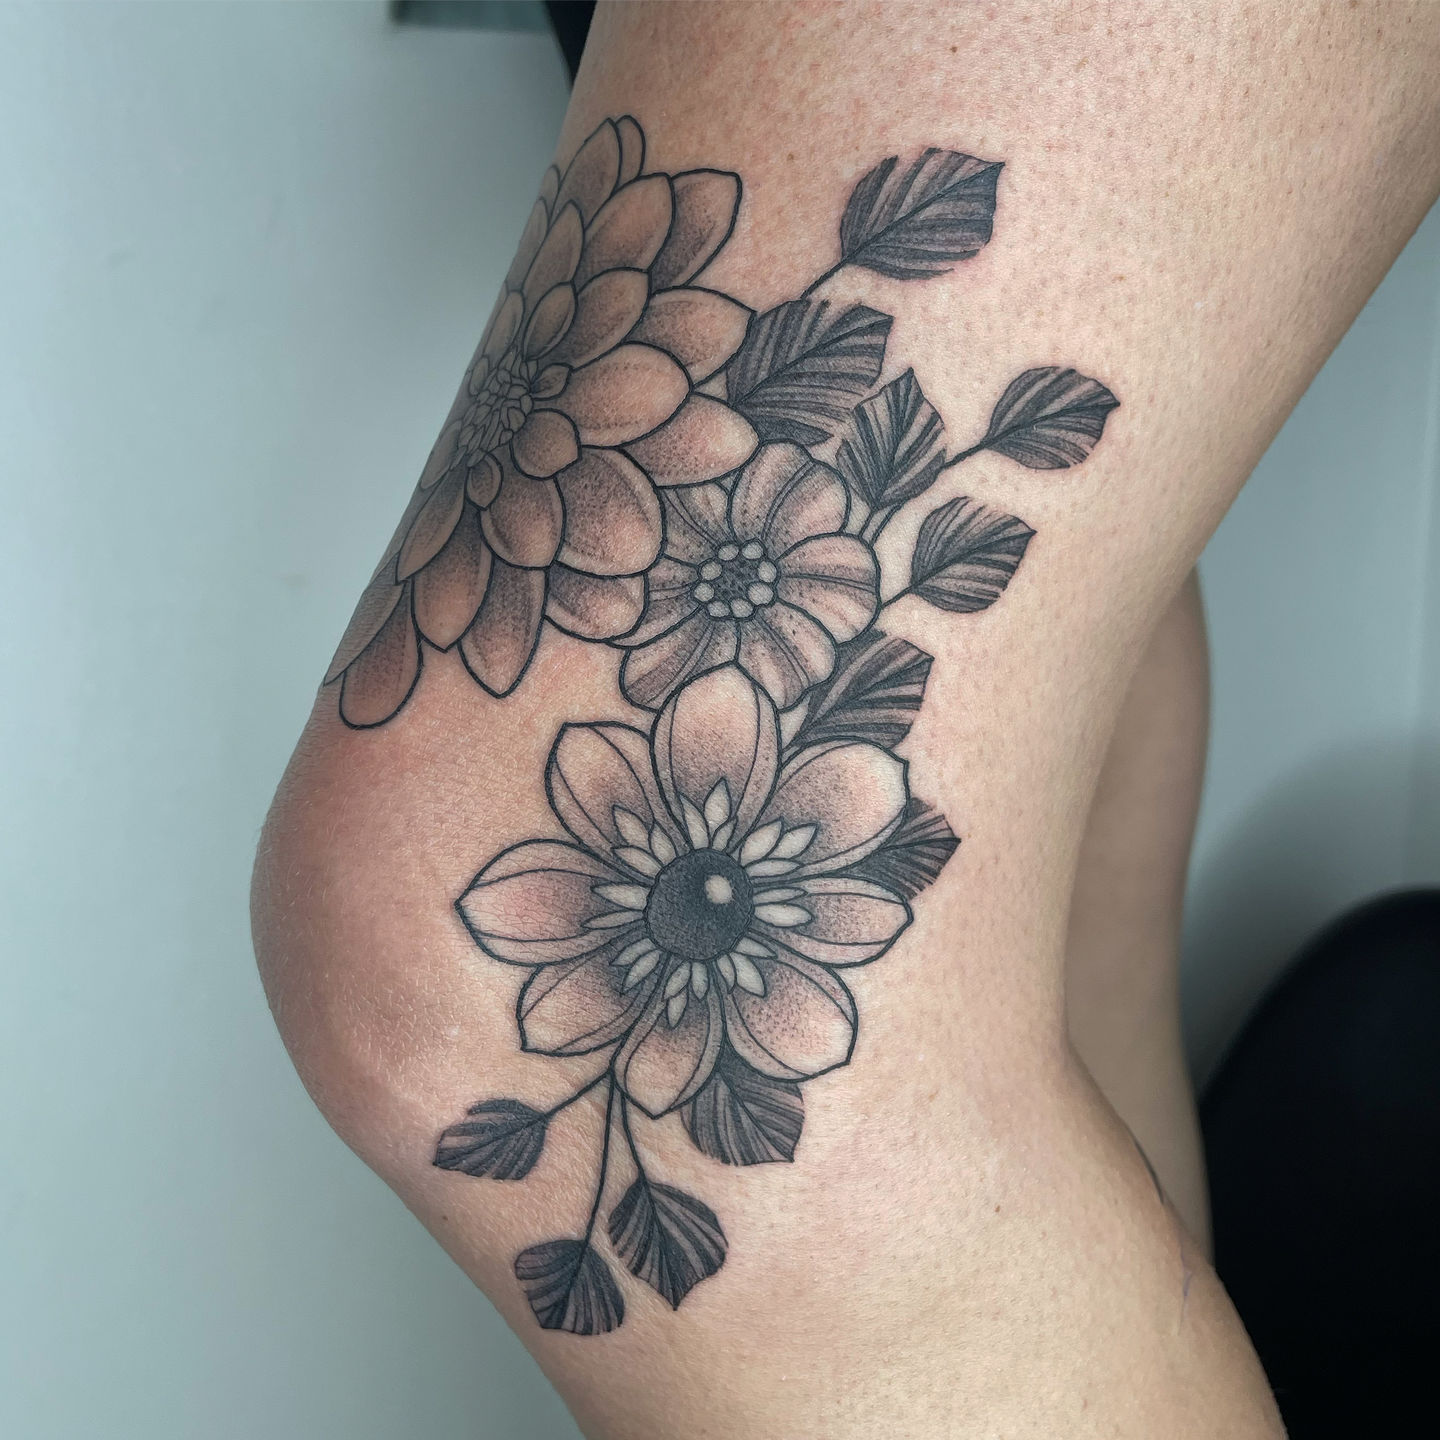 Knee Tattoos That Will Change The Way You Look To Them